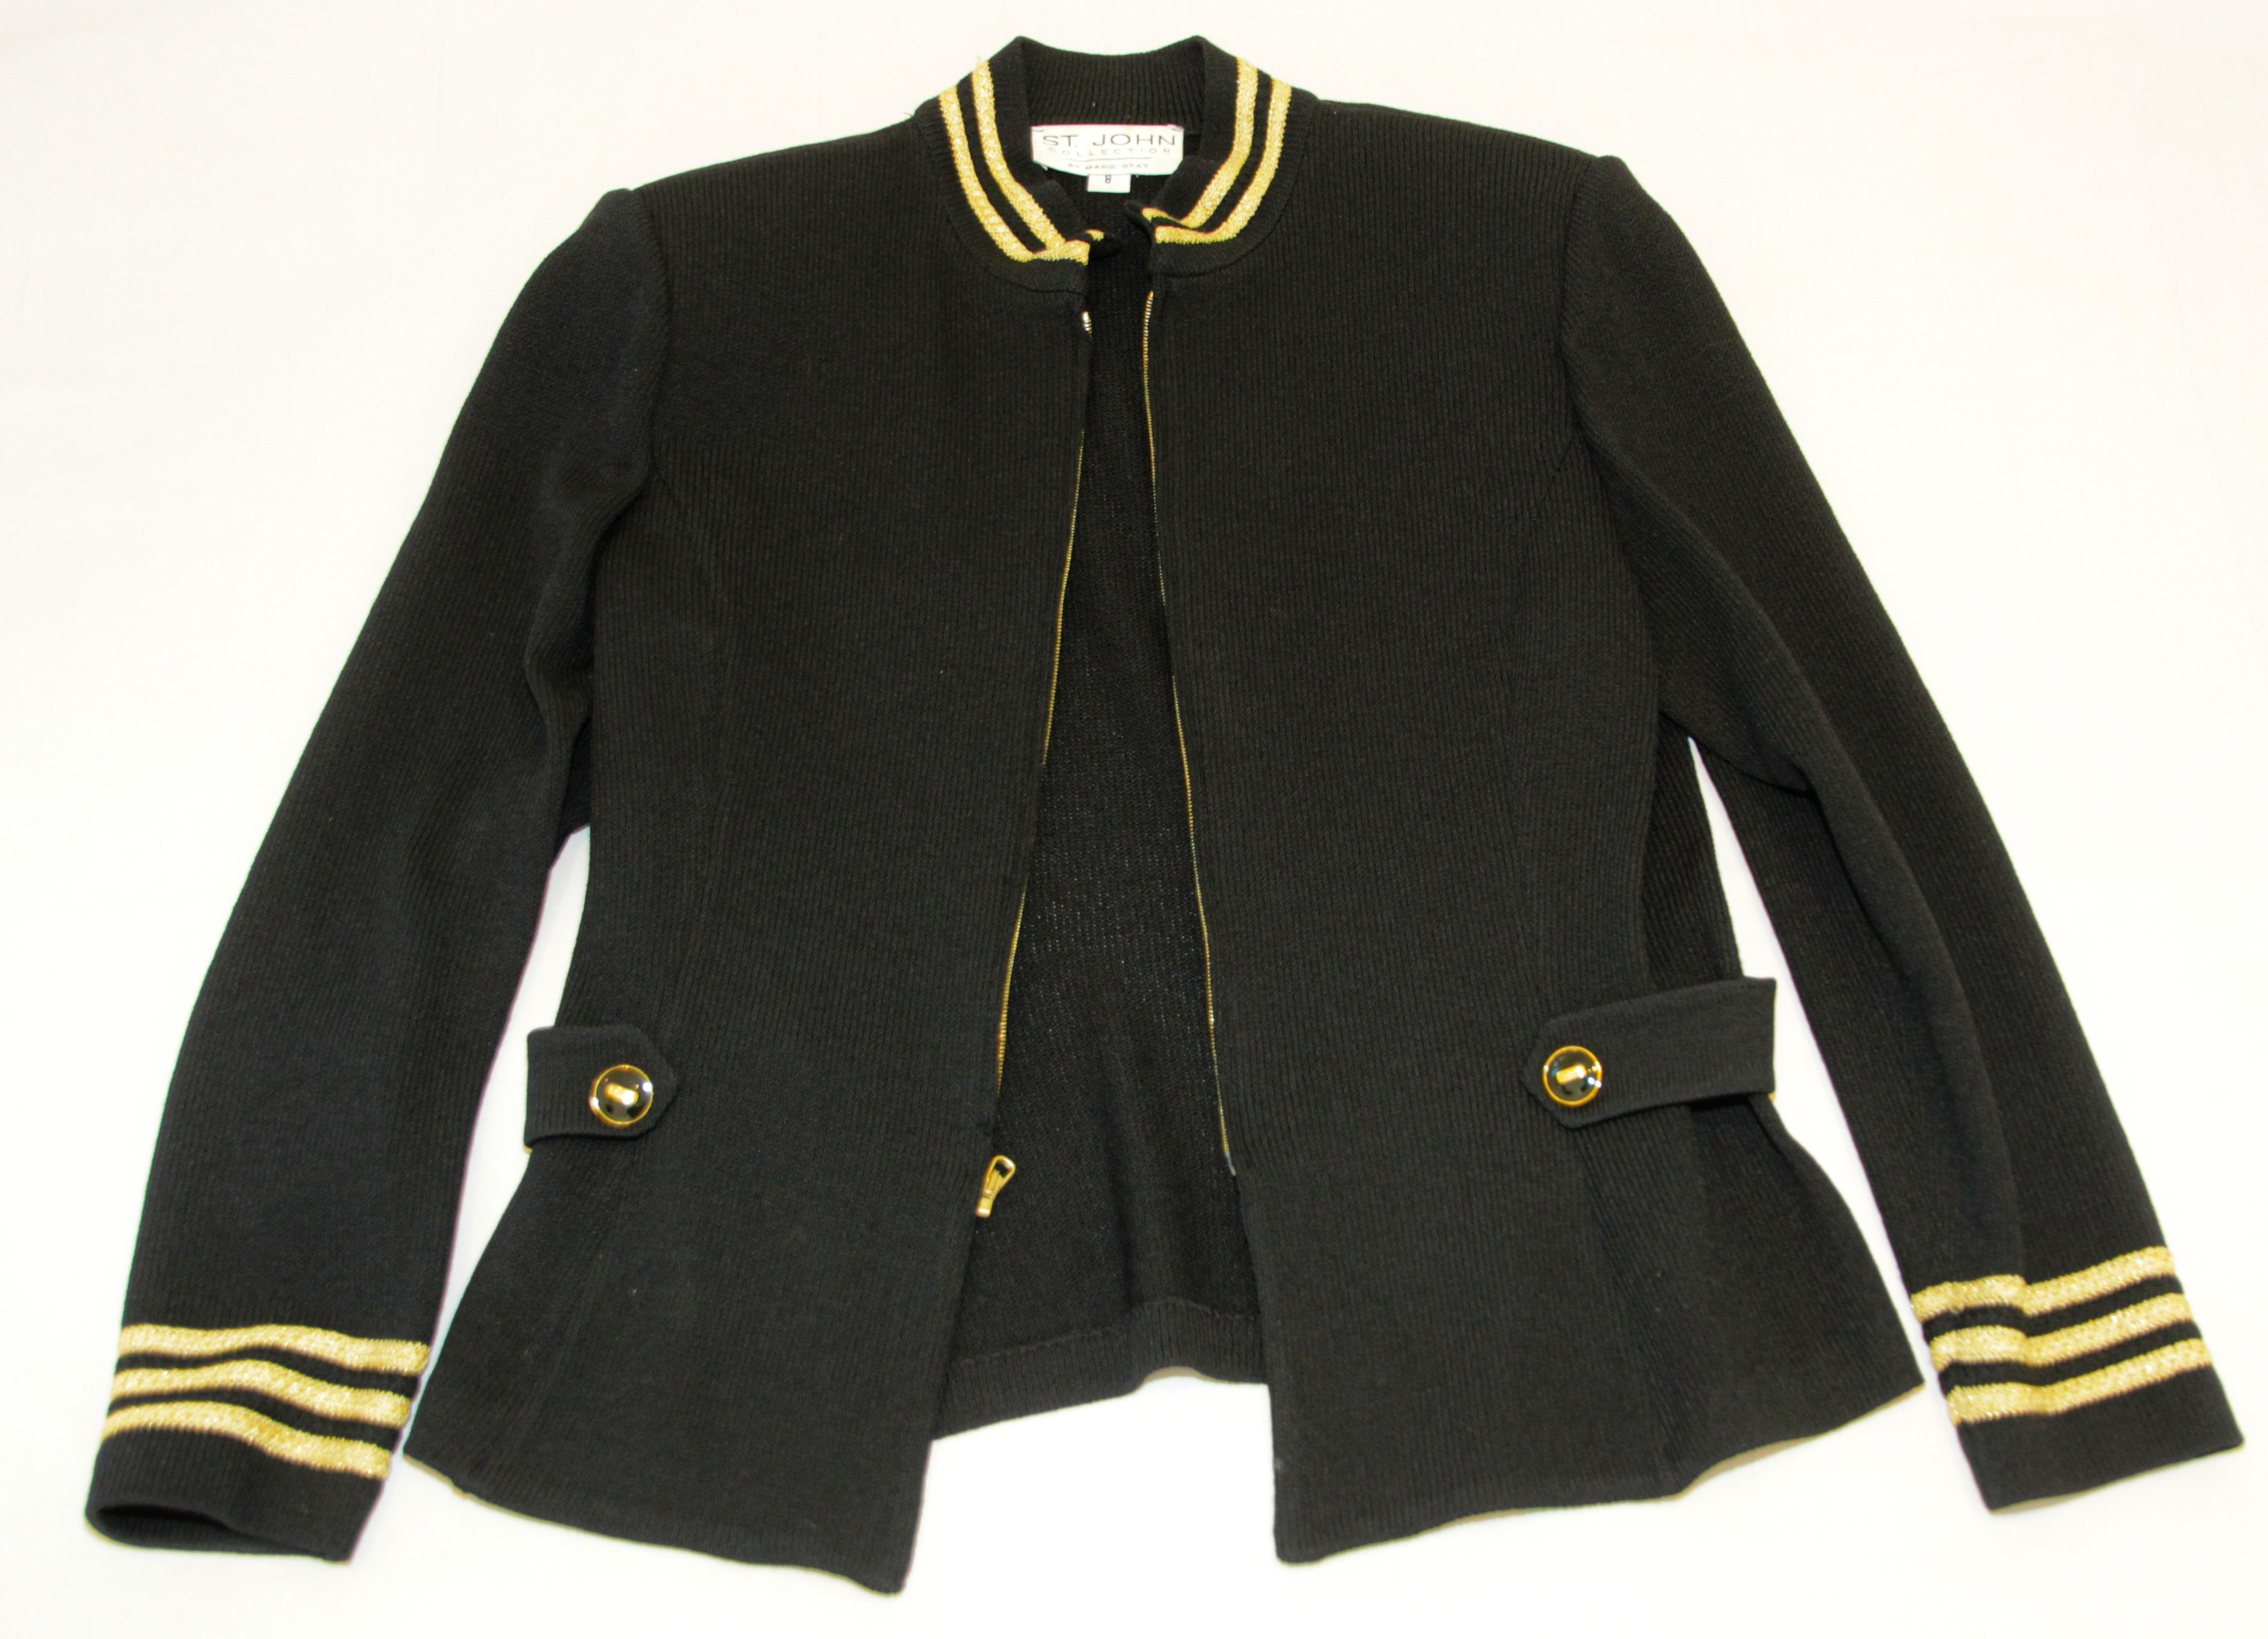 St. John Military Blazer Knit Jacket 1990's Black and Gold For Sale 4